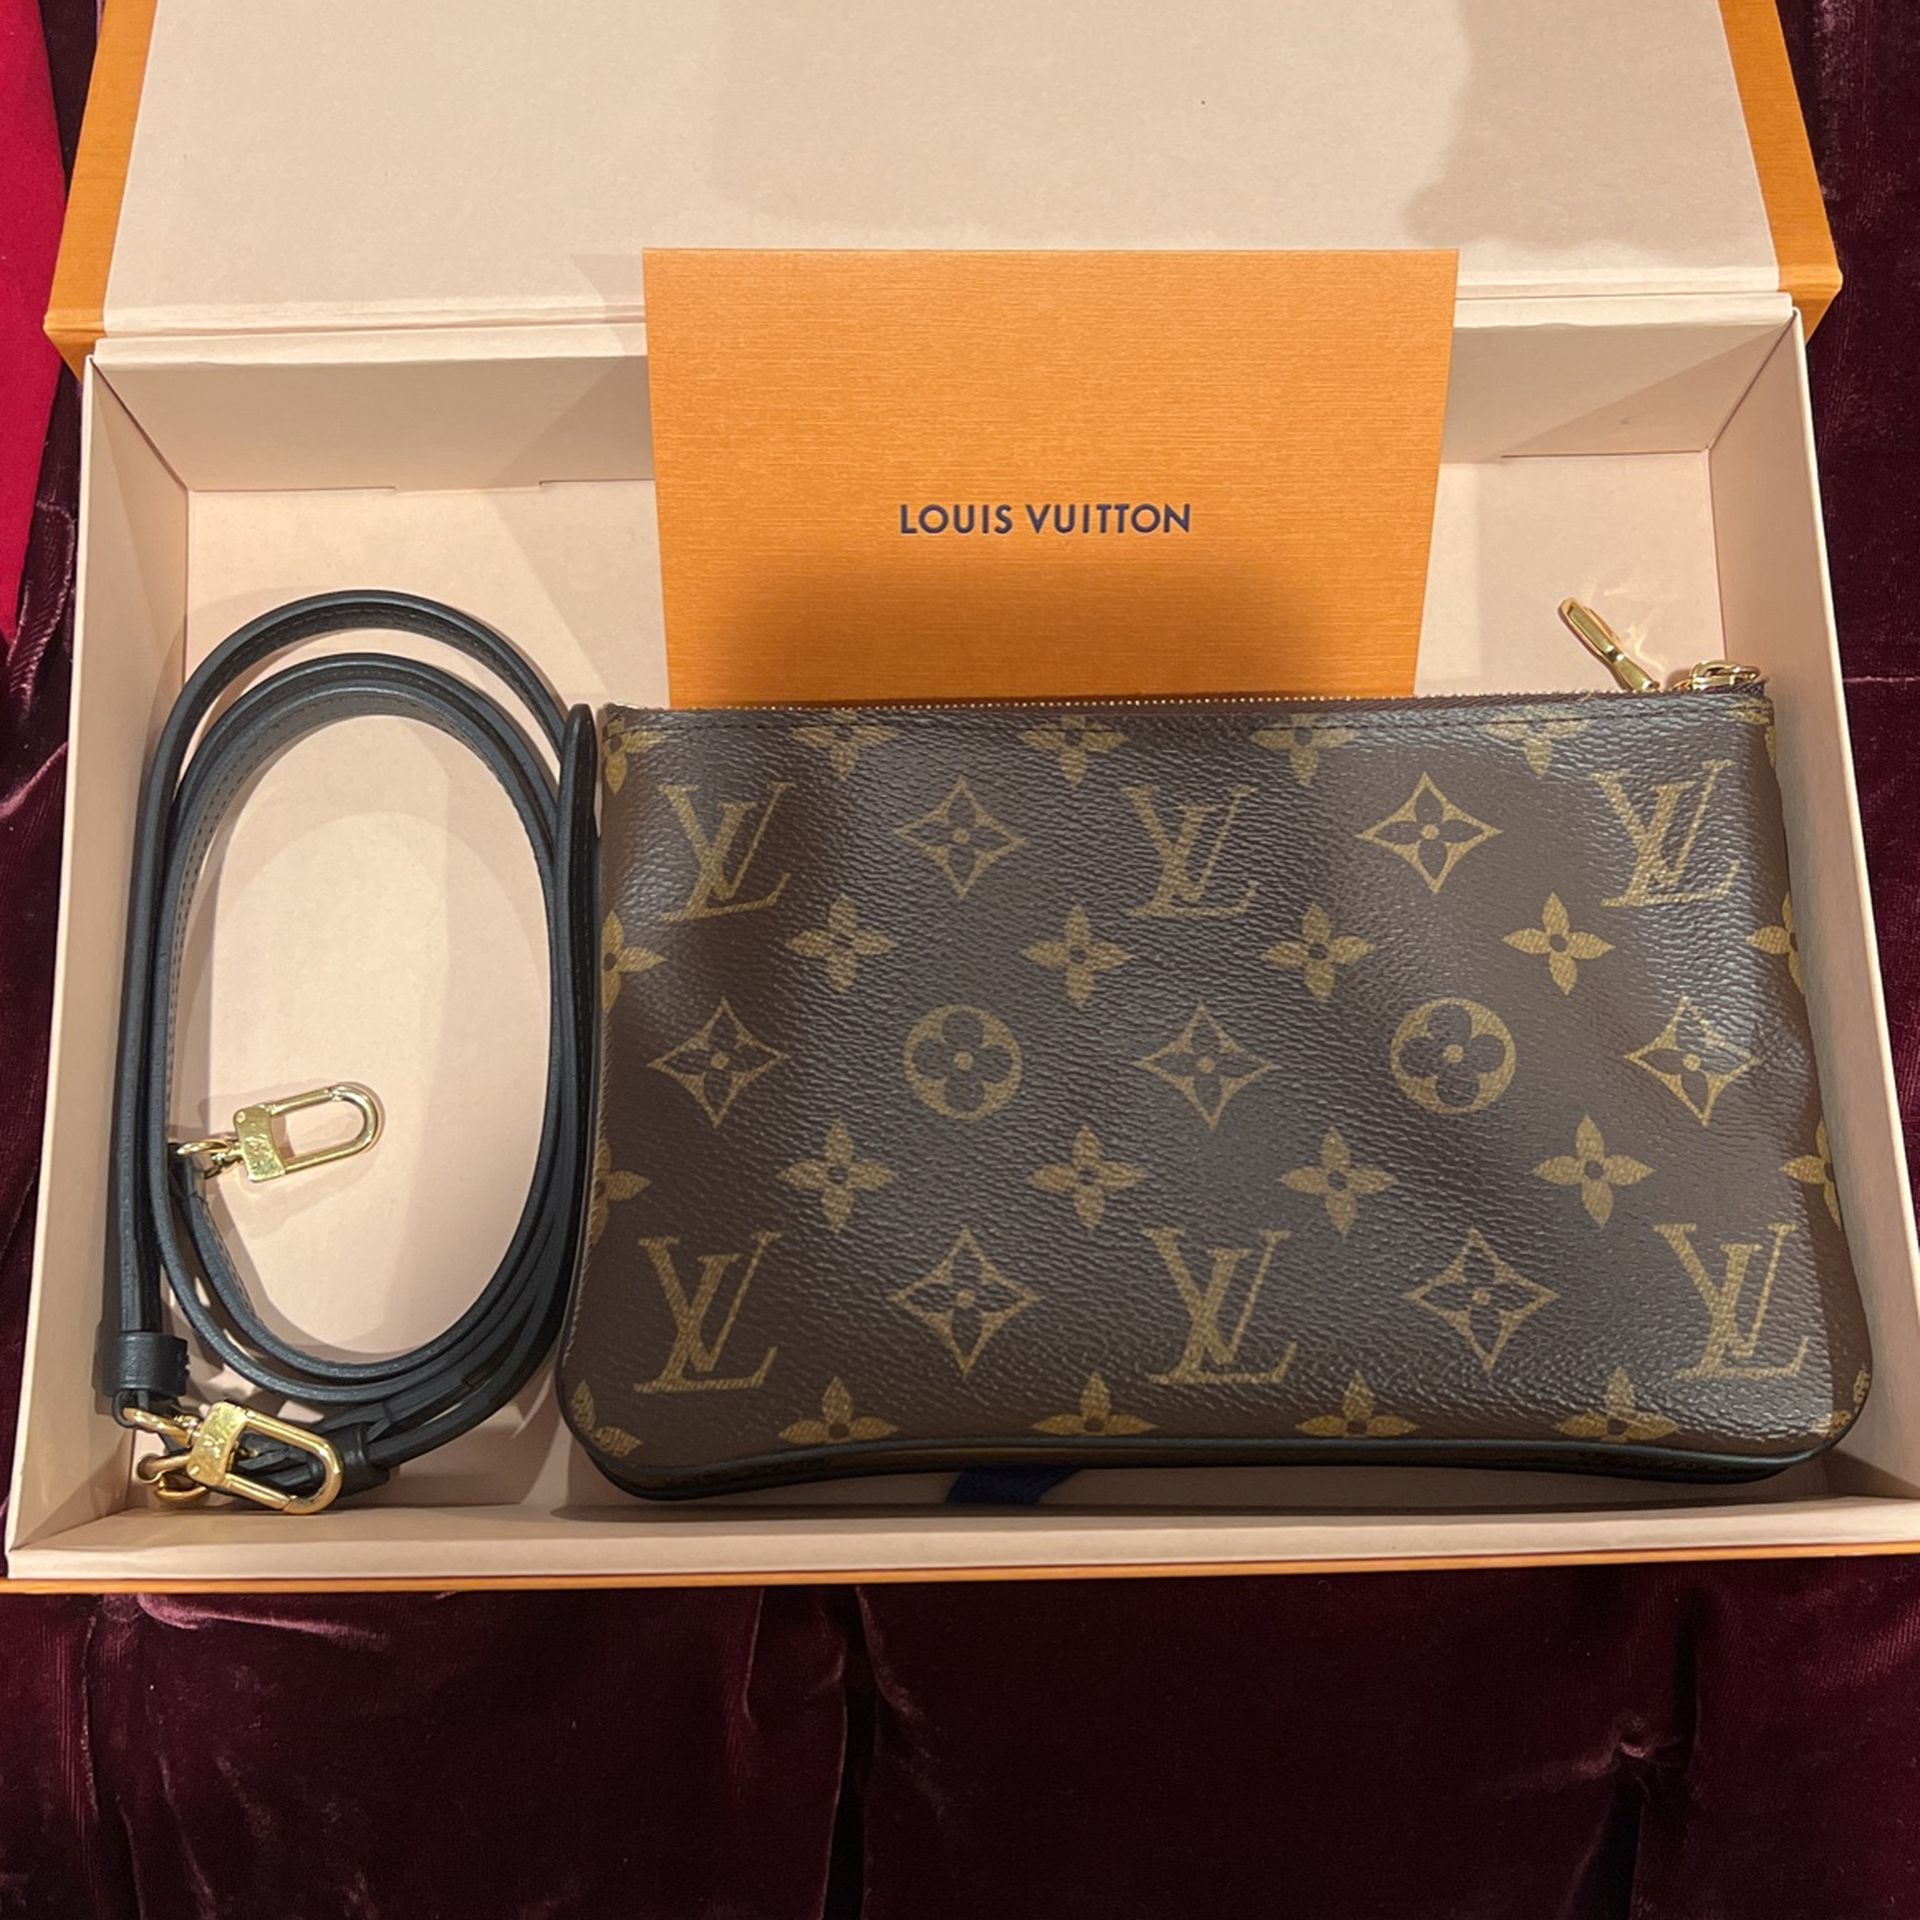 Louis Vuitton Hand Bag for Sale in Irwindale, CA - OfferUp